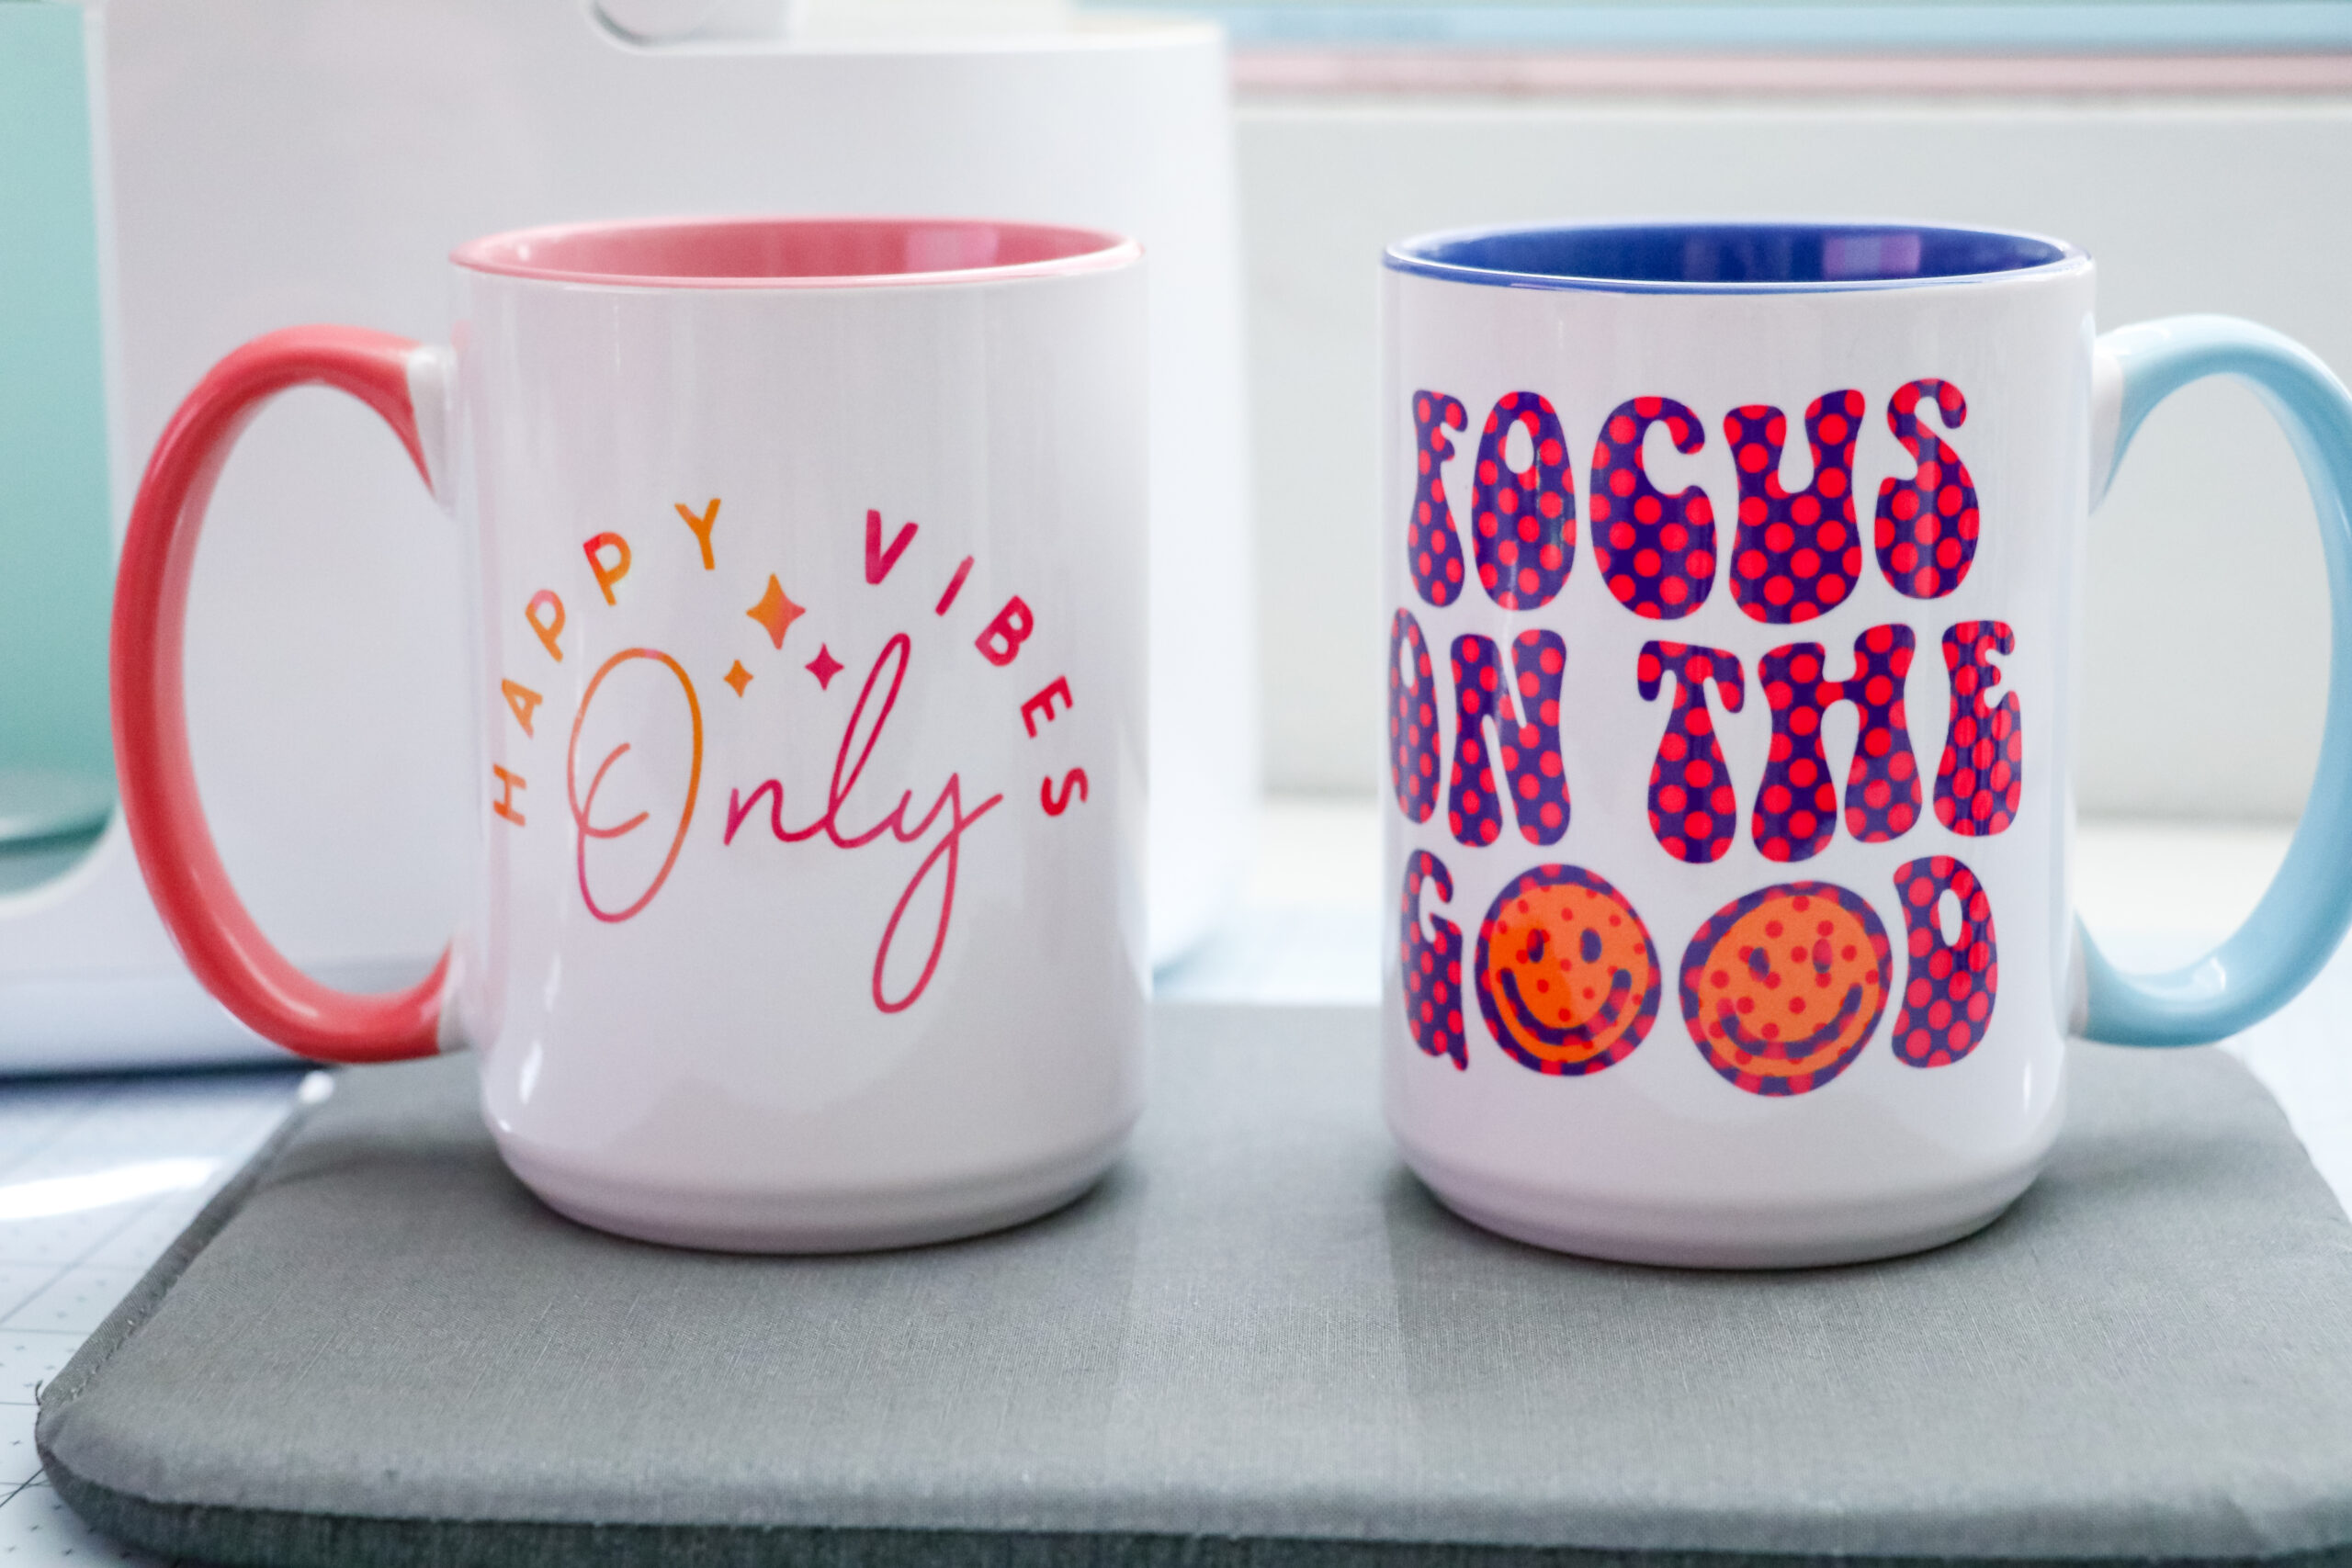 https://www.thedenverhousewife.com/wp-content/uploads/2022/10/How-to-Make-Cricut-Personalized-Mug-8-scaled.jpg